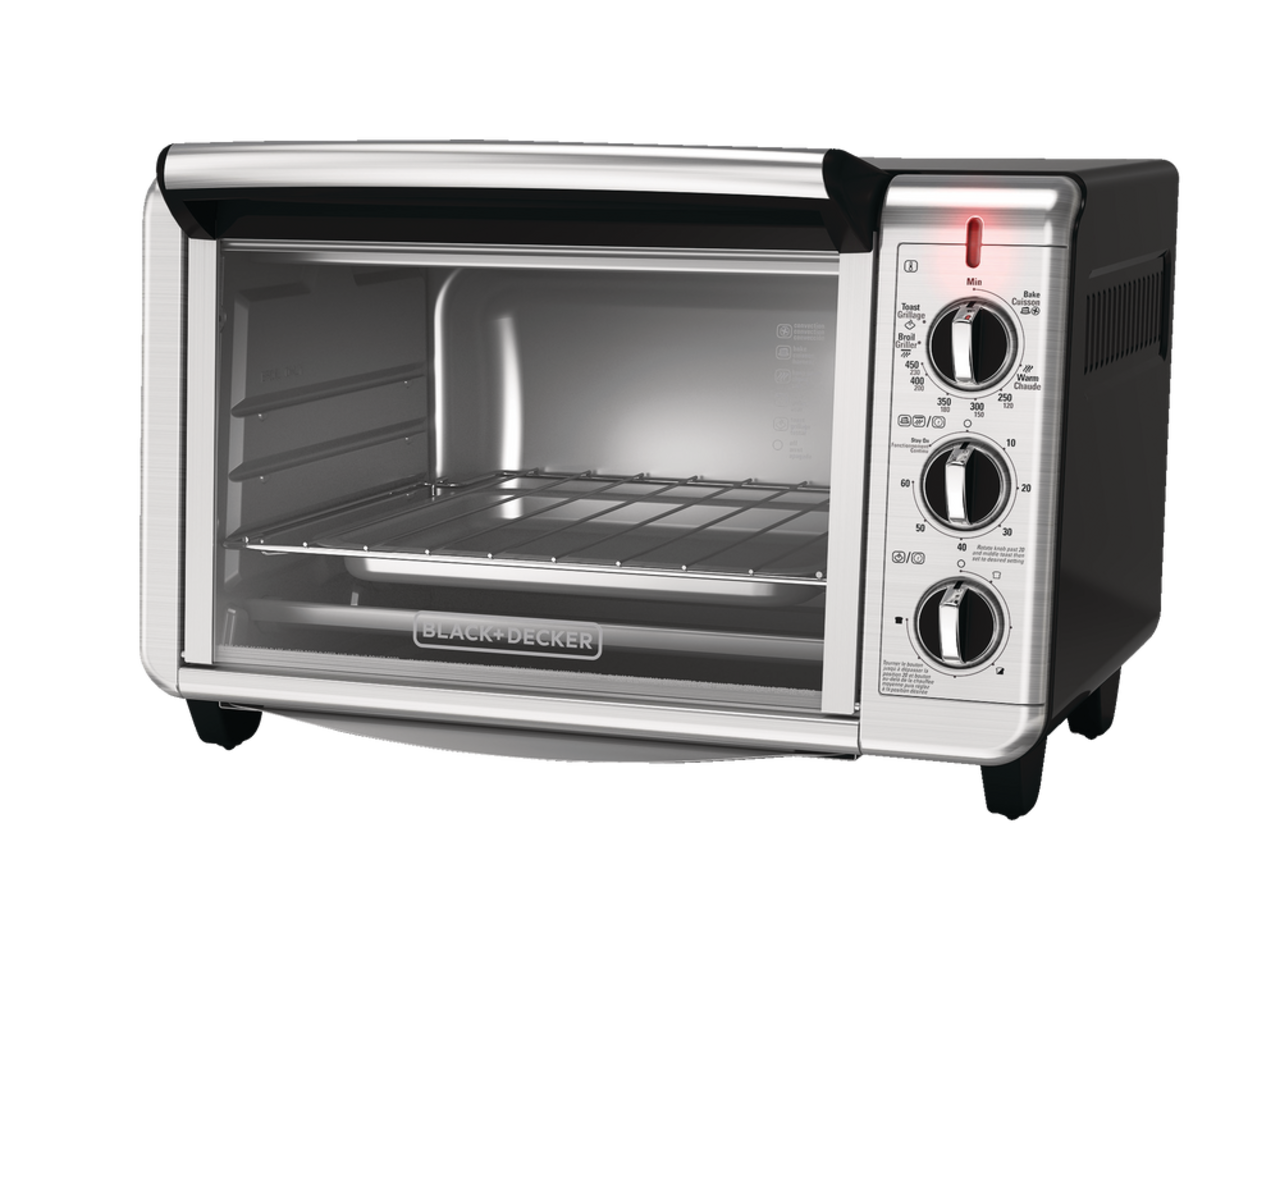 https://media-www.canadiantire.ca/product/living/kitchen/kitchen-appliances/0430832/black-decker-6-slice-convection-toaster-oven-f2fe0412-efd2-4b47-932b-1d017dc0240f.png?imdensity=1&imwidth=640&impolicy=mZoom